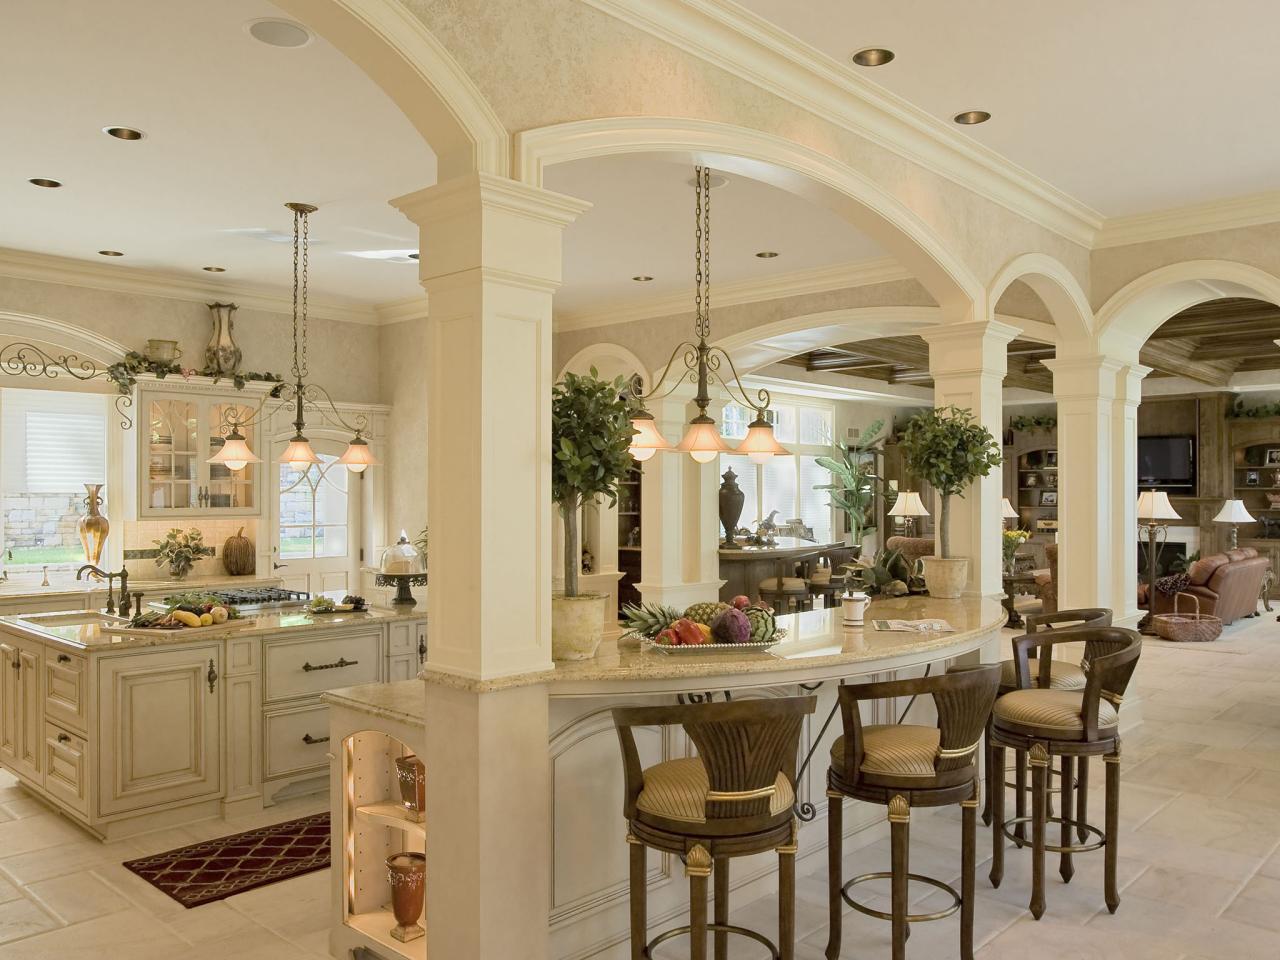 French Style Kitchen Islands Pictures Ideas From Hgtv Hgtv